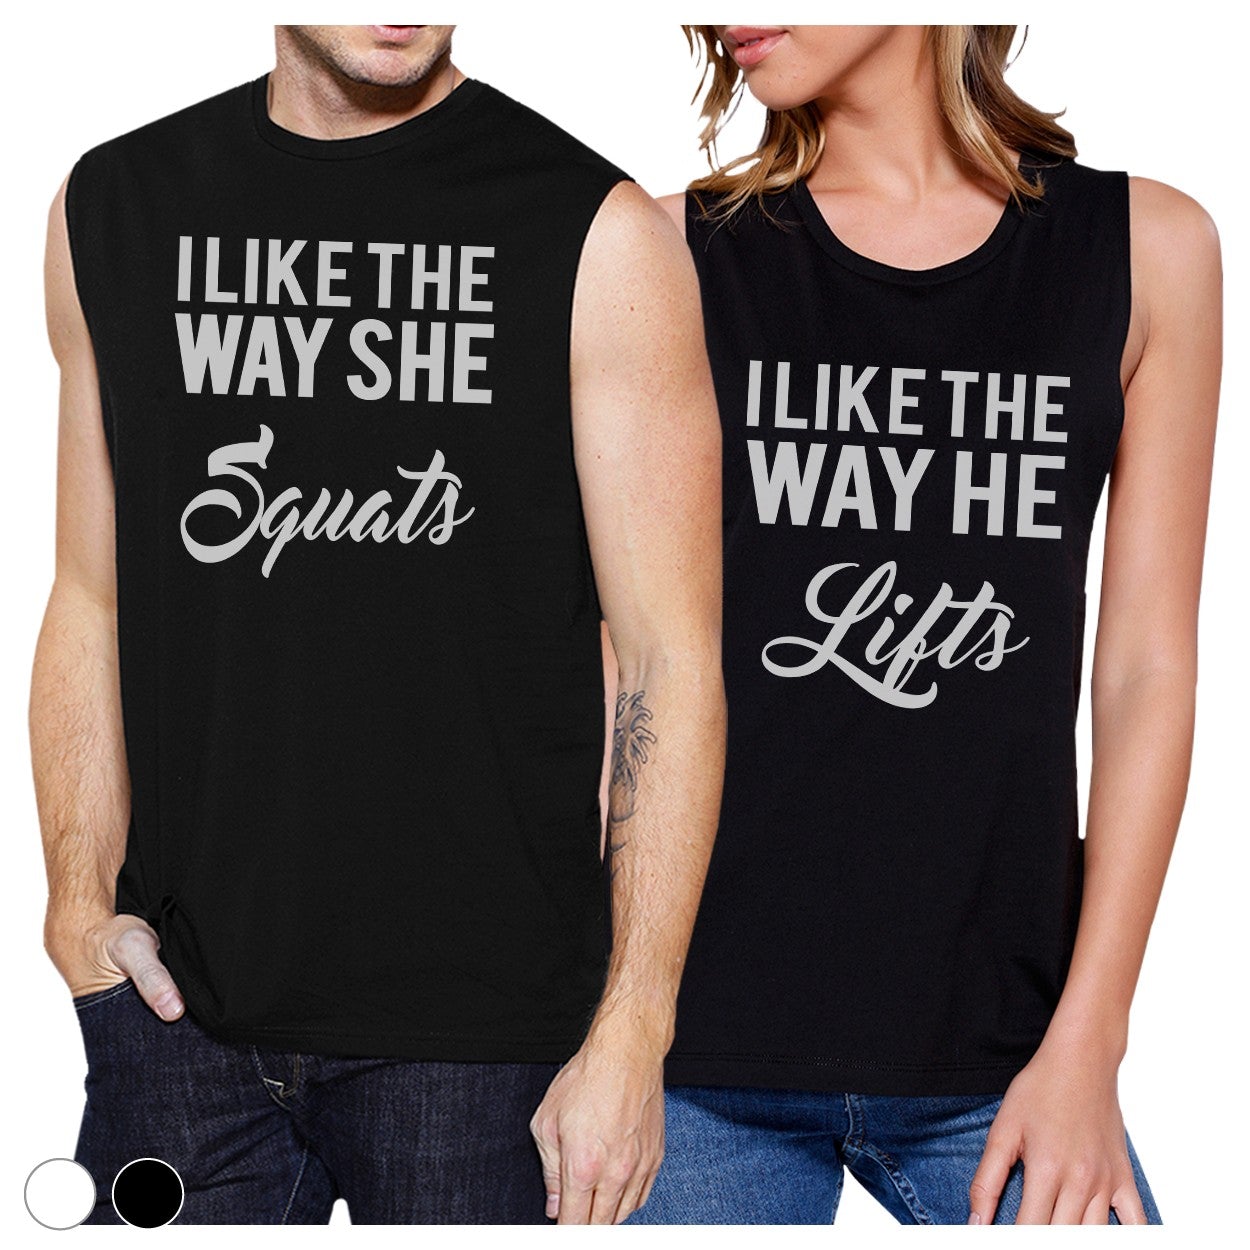 Squats Lifts Cute Workout Shirts Cute Couple Gifts Couple Muscle Tops Black